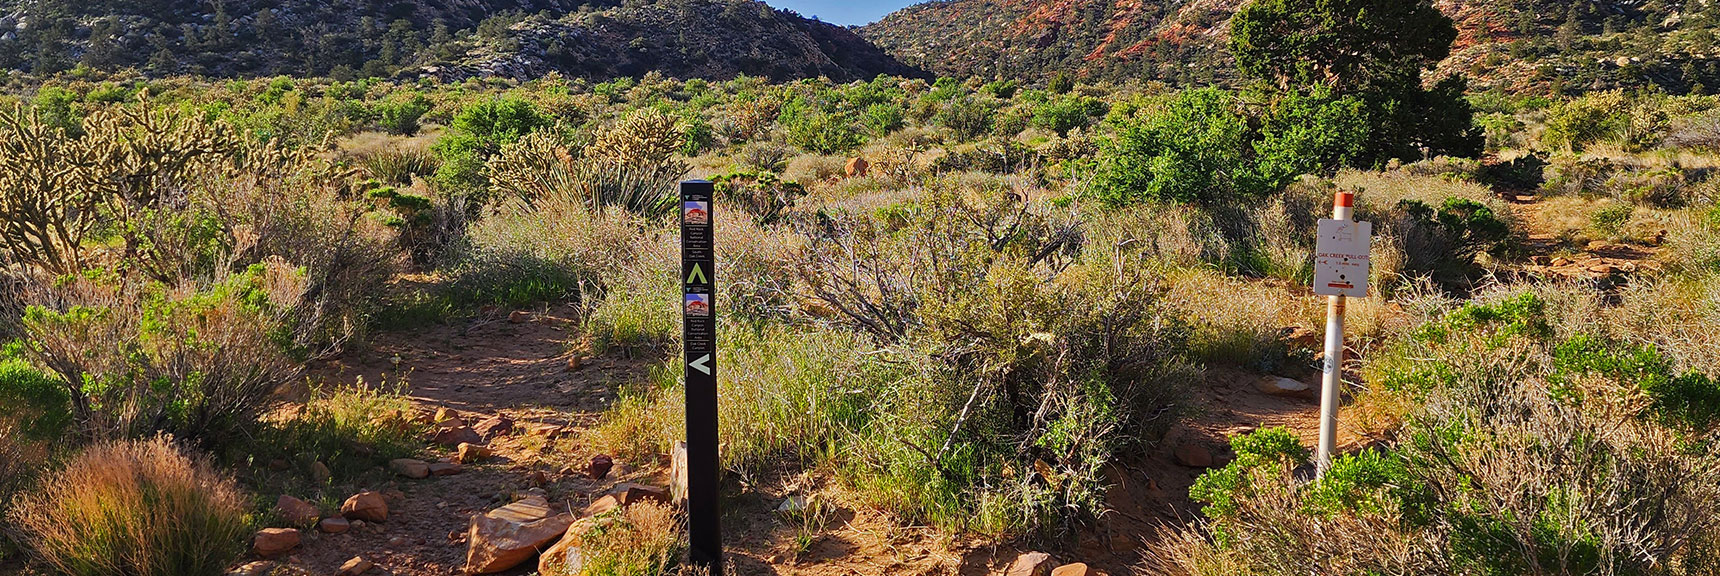 Another Trail Continues South to Middle Oak Creek Trailhead | Knoll Trail | Red Rock Canyon National Conservation Area, Nevada | David Smith | LasVegasAreaTrails.com